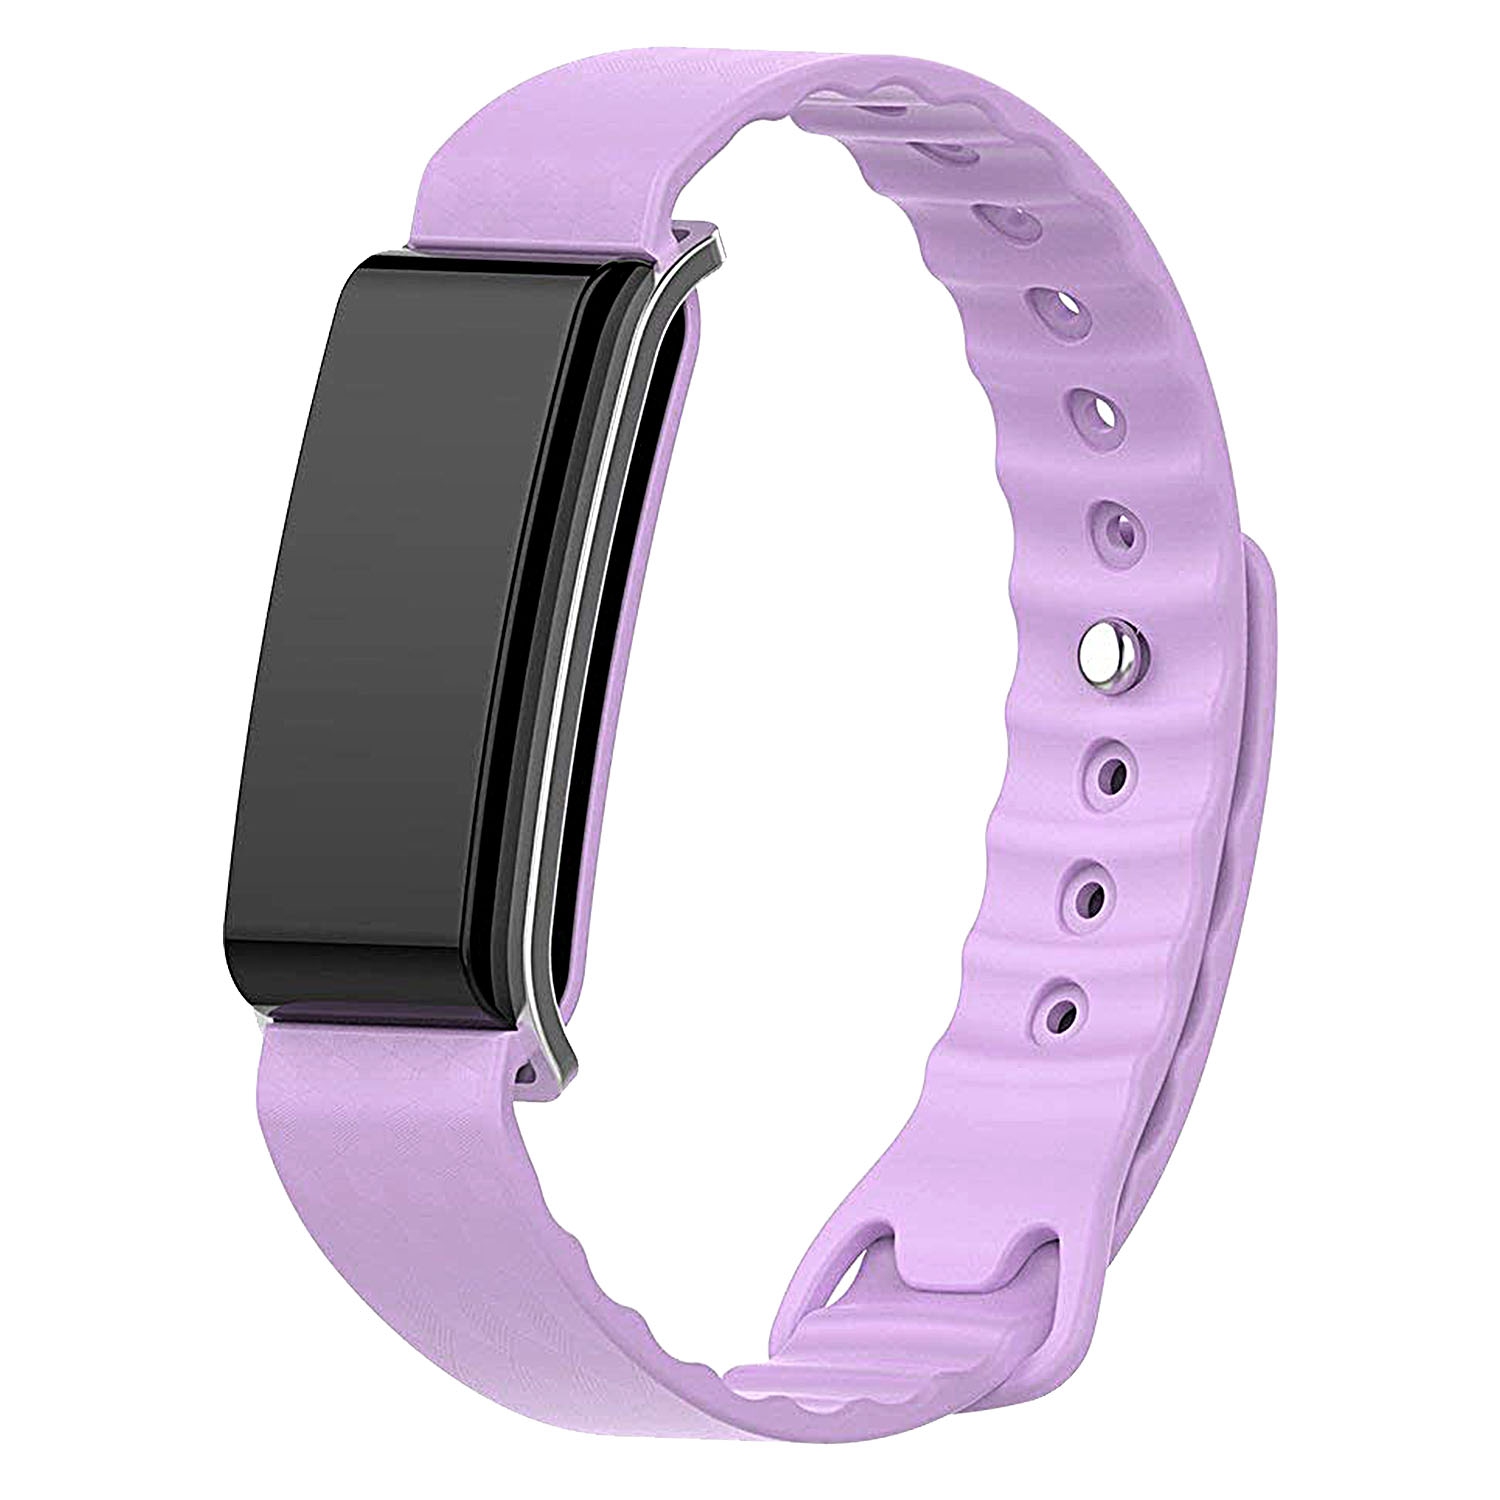 StrapsCo Classic Silicone Rubber Replacement Watch Strap for Huawei Honor/Color Band A2 - Purple